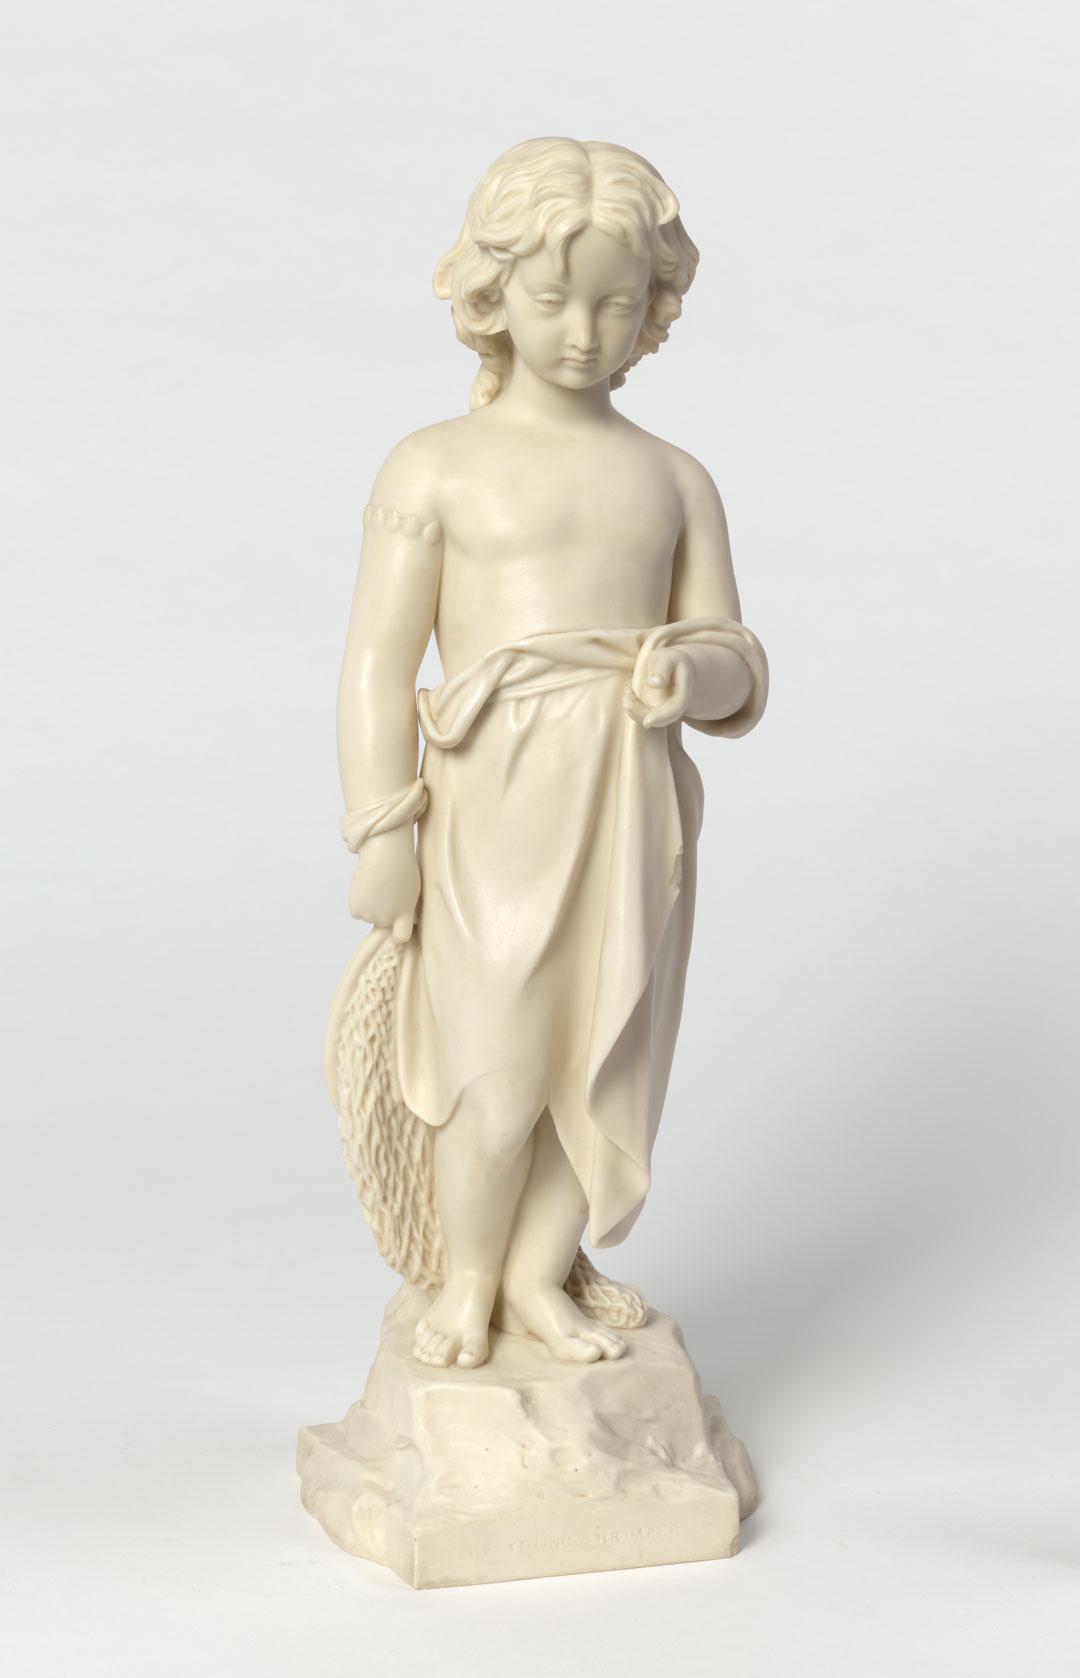 Artwork The young shrimper this artwork made of Porcelain, slip-cast parian, created in 1862-01-01